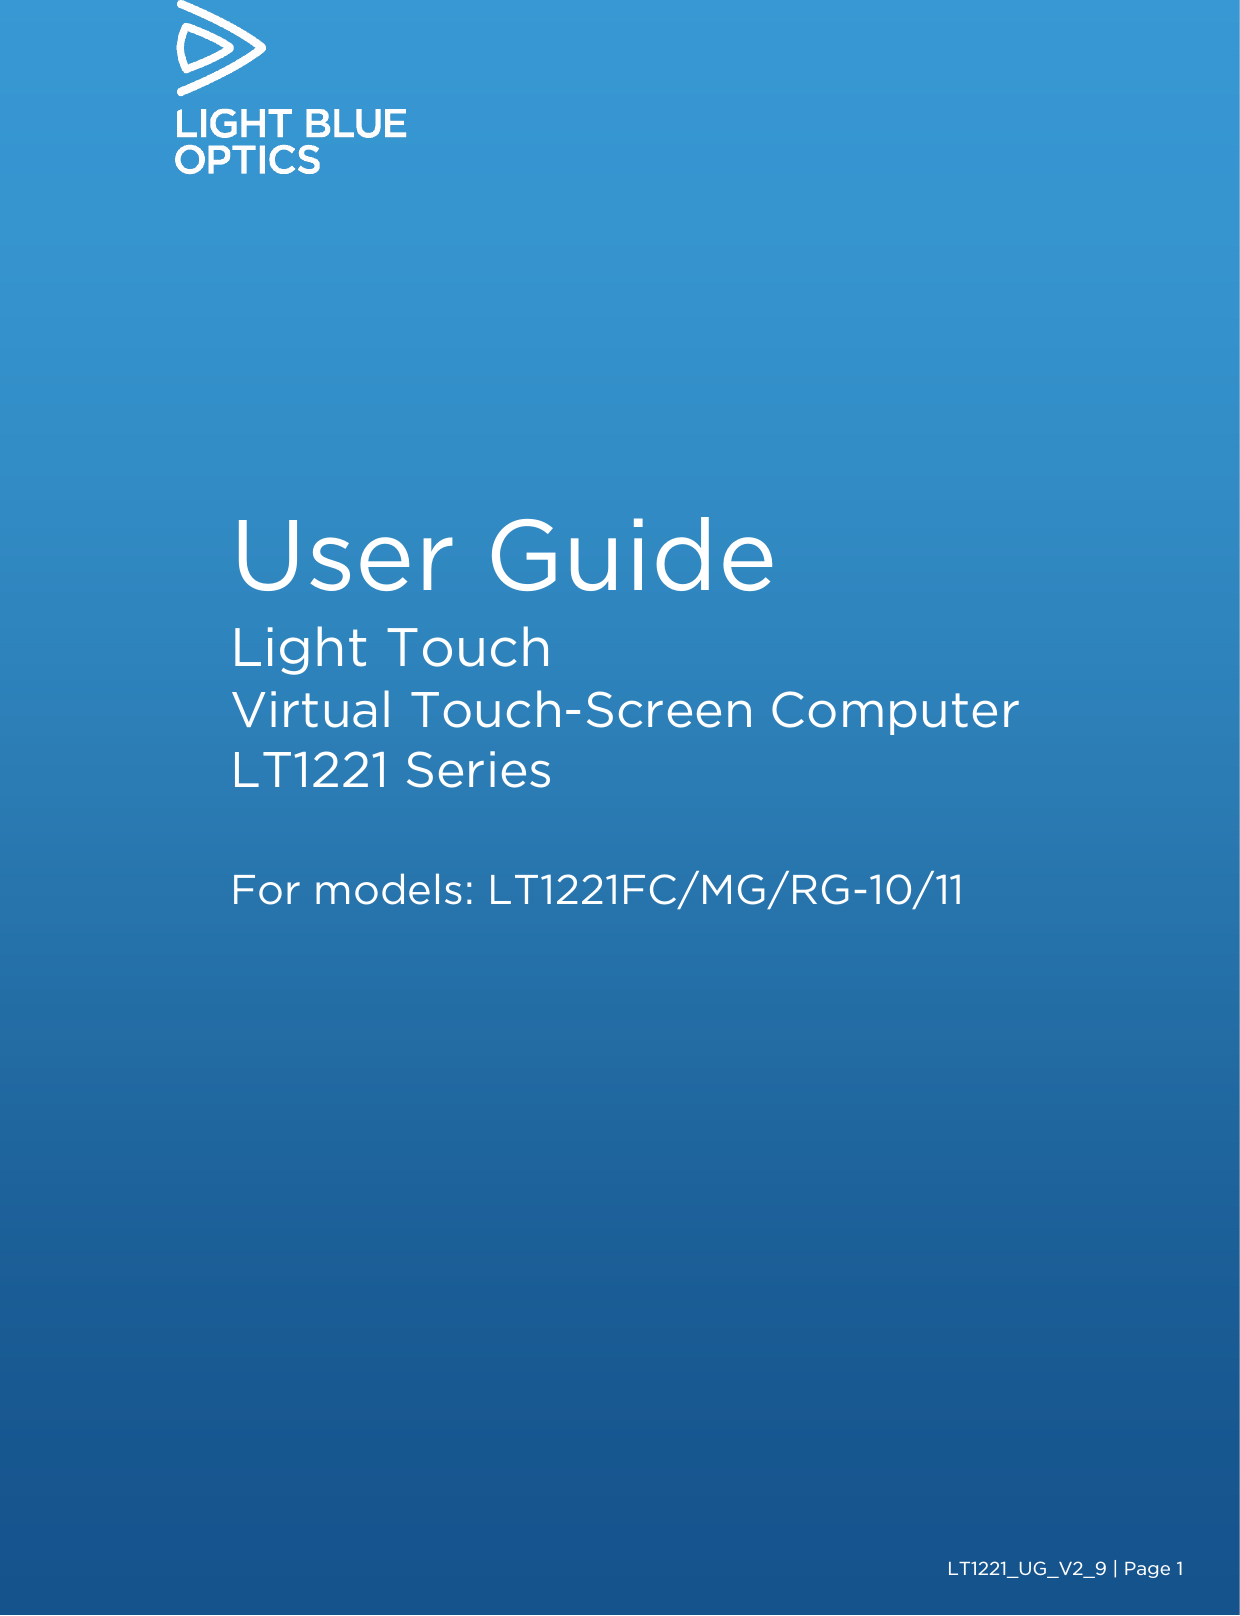        User Guide Light Touch  Virtual Touch-Screen Computer LT1221 Series  For models: LT1221FC/MG/RG-10/11  LT1221_UG_V2_9 | Page 1